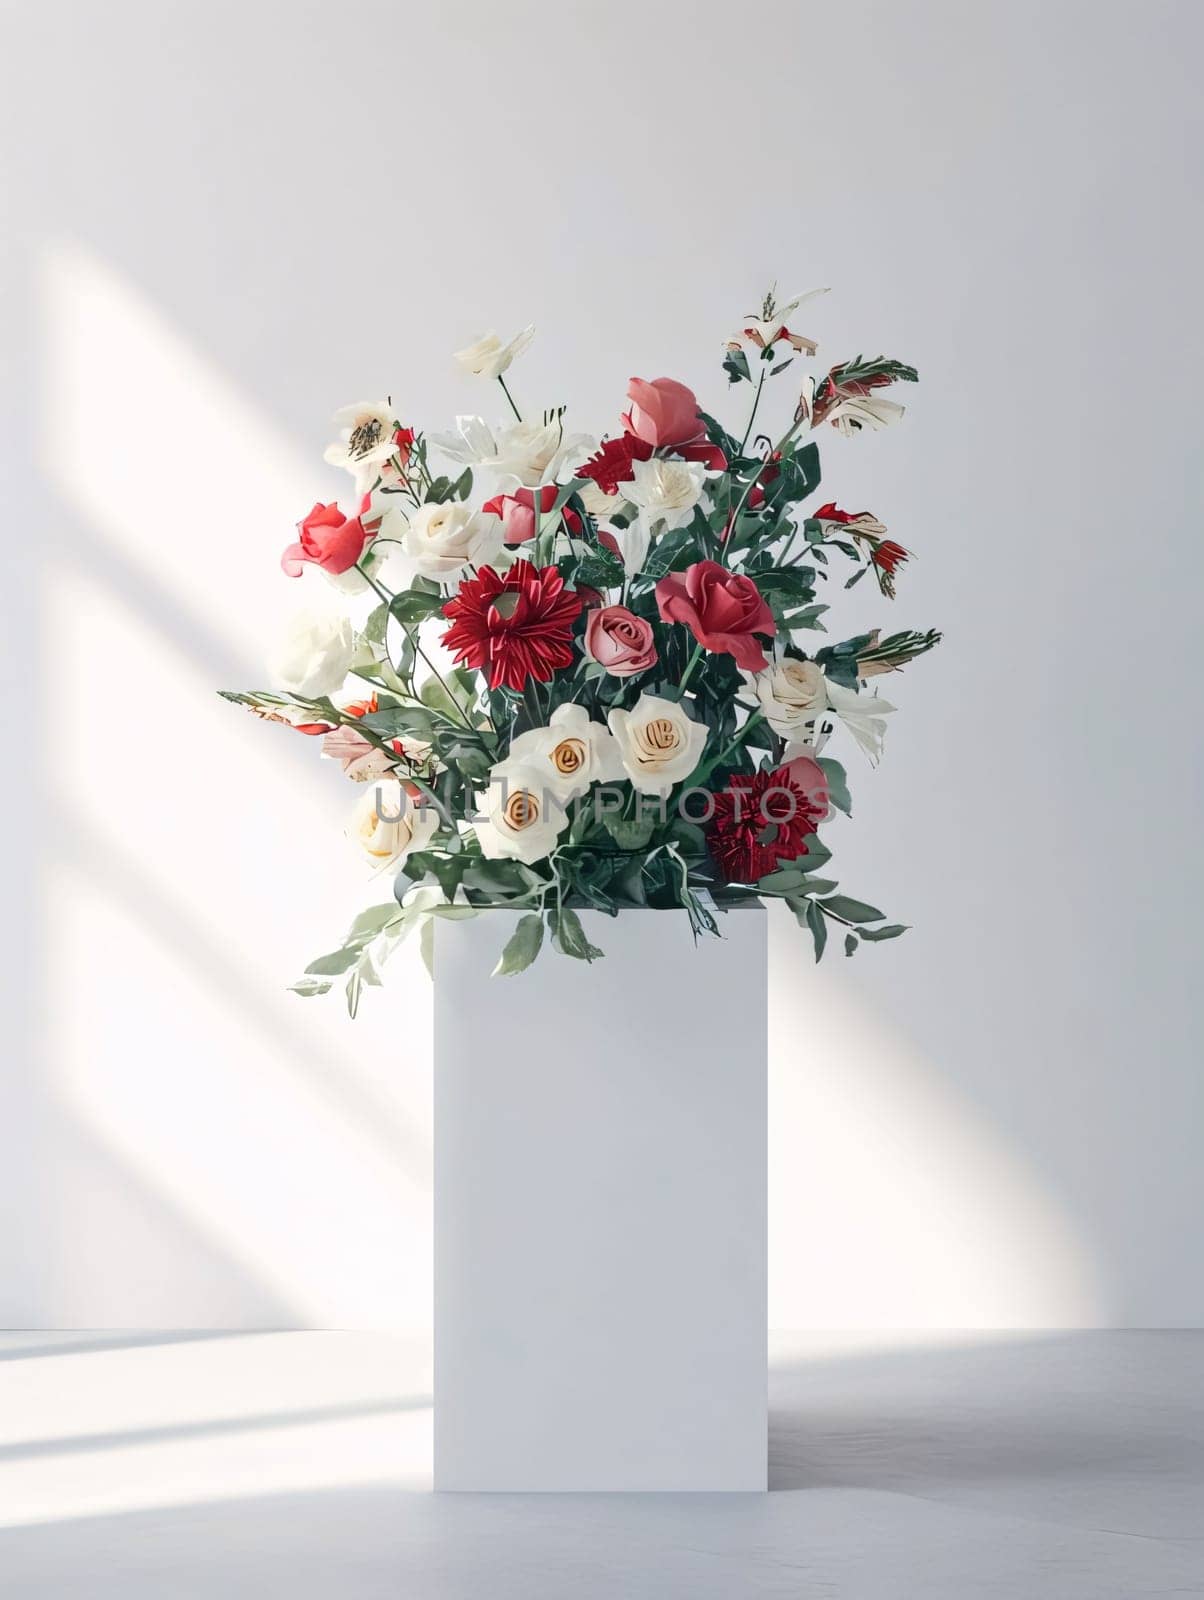 Bouquet of white and red flowers with green leaves in a square vase on a white background. Flowering flowers, a symbol of spring, new life. A joyful time of nature waking up to life.